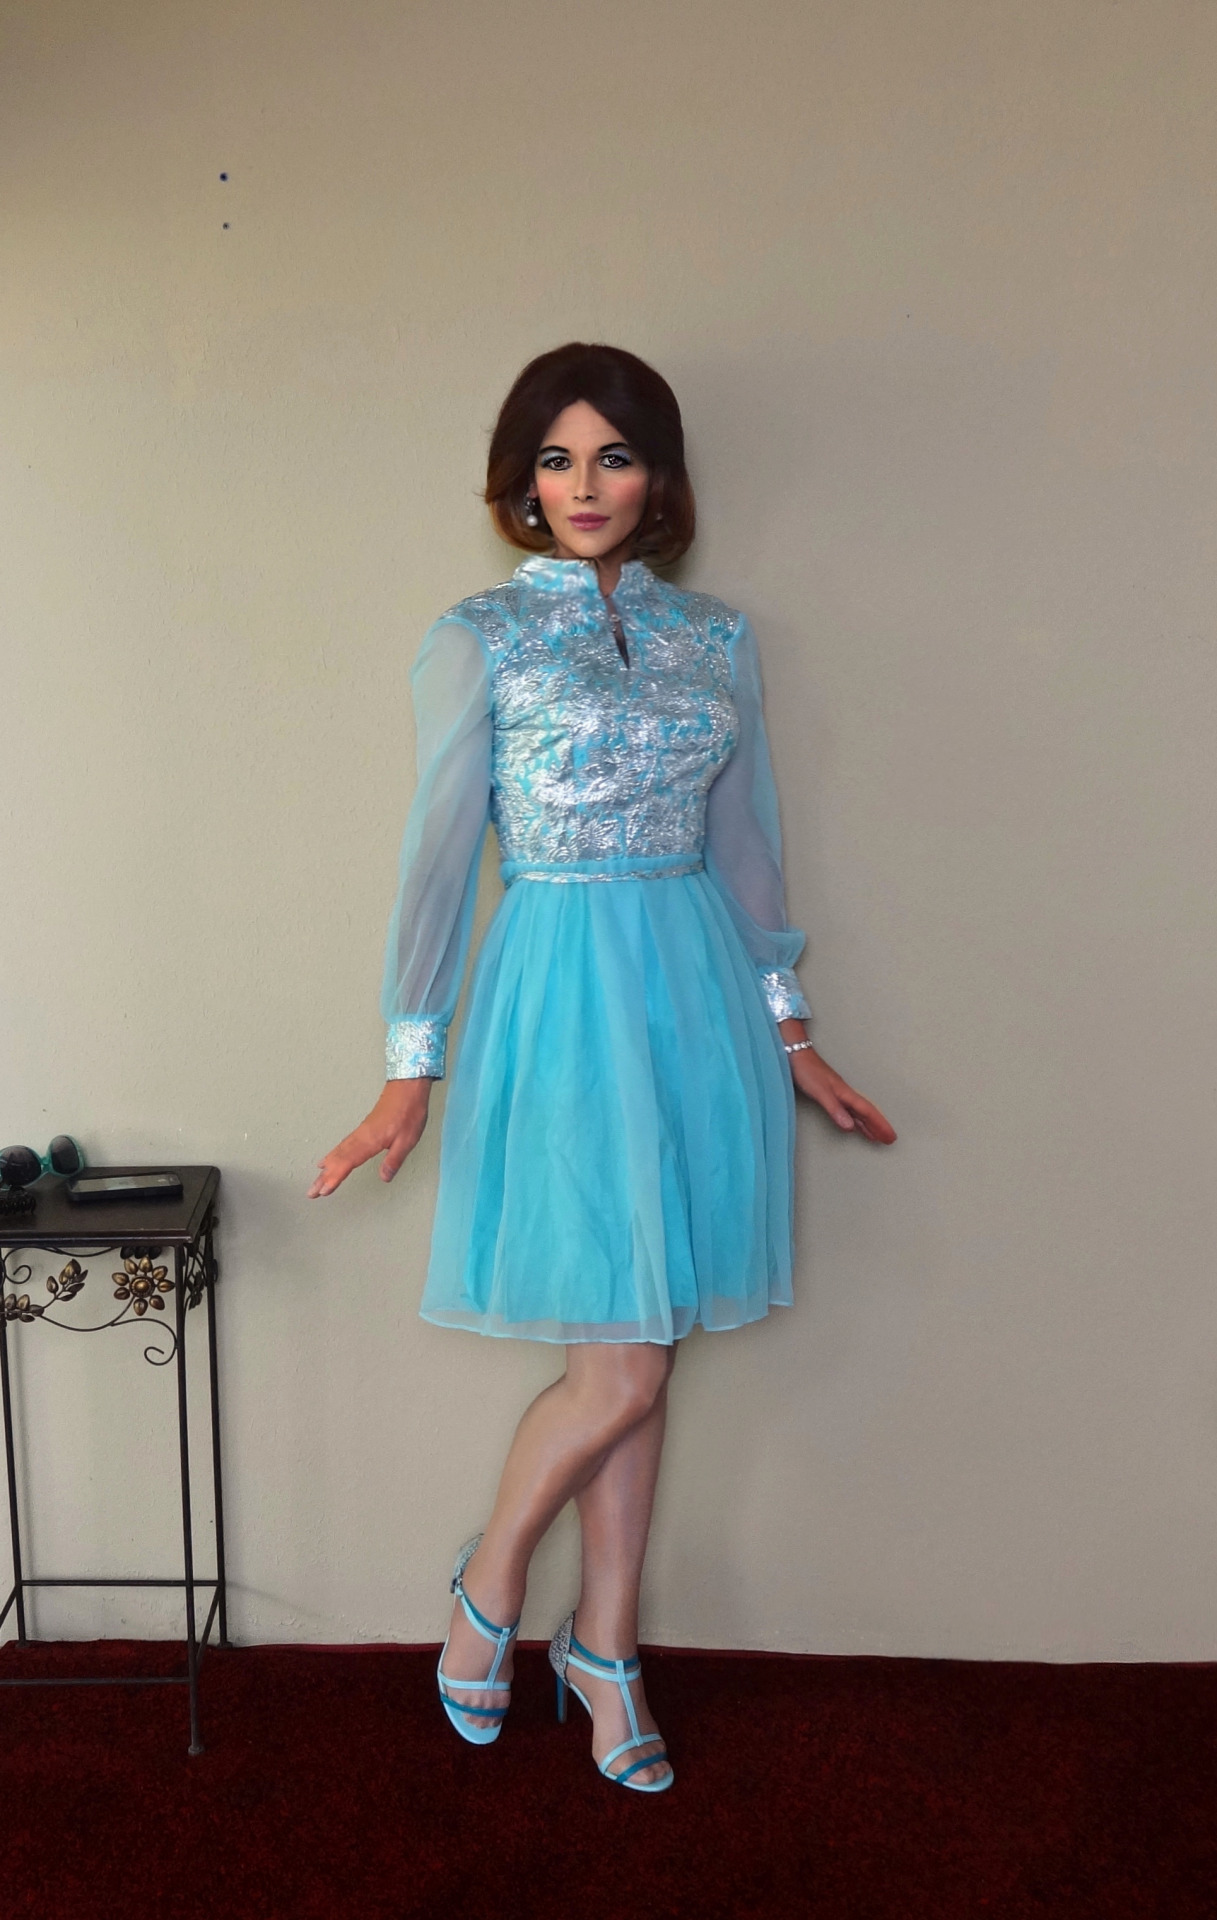 onlymonica:  This is a pretty rare vintage party dress from the 1960s, featured in